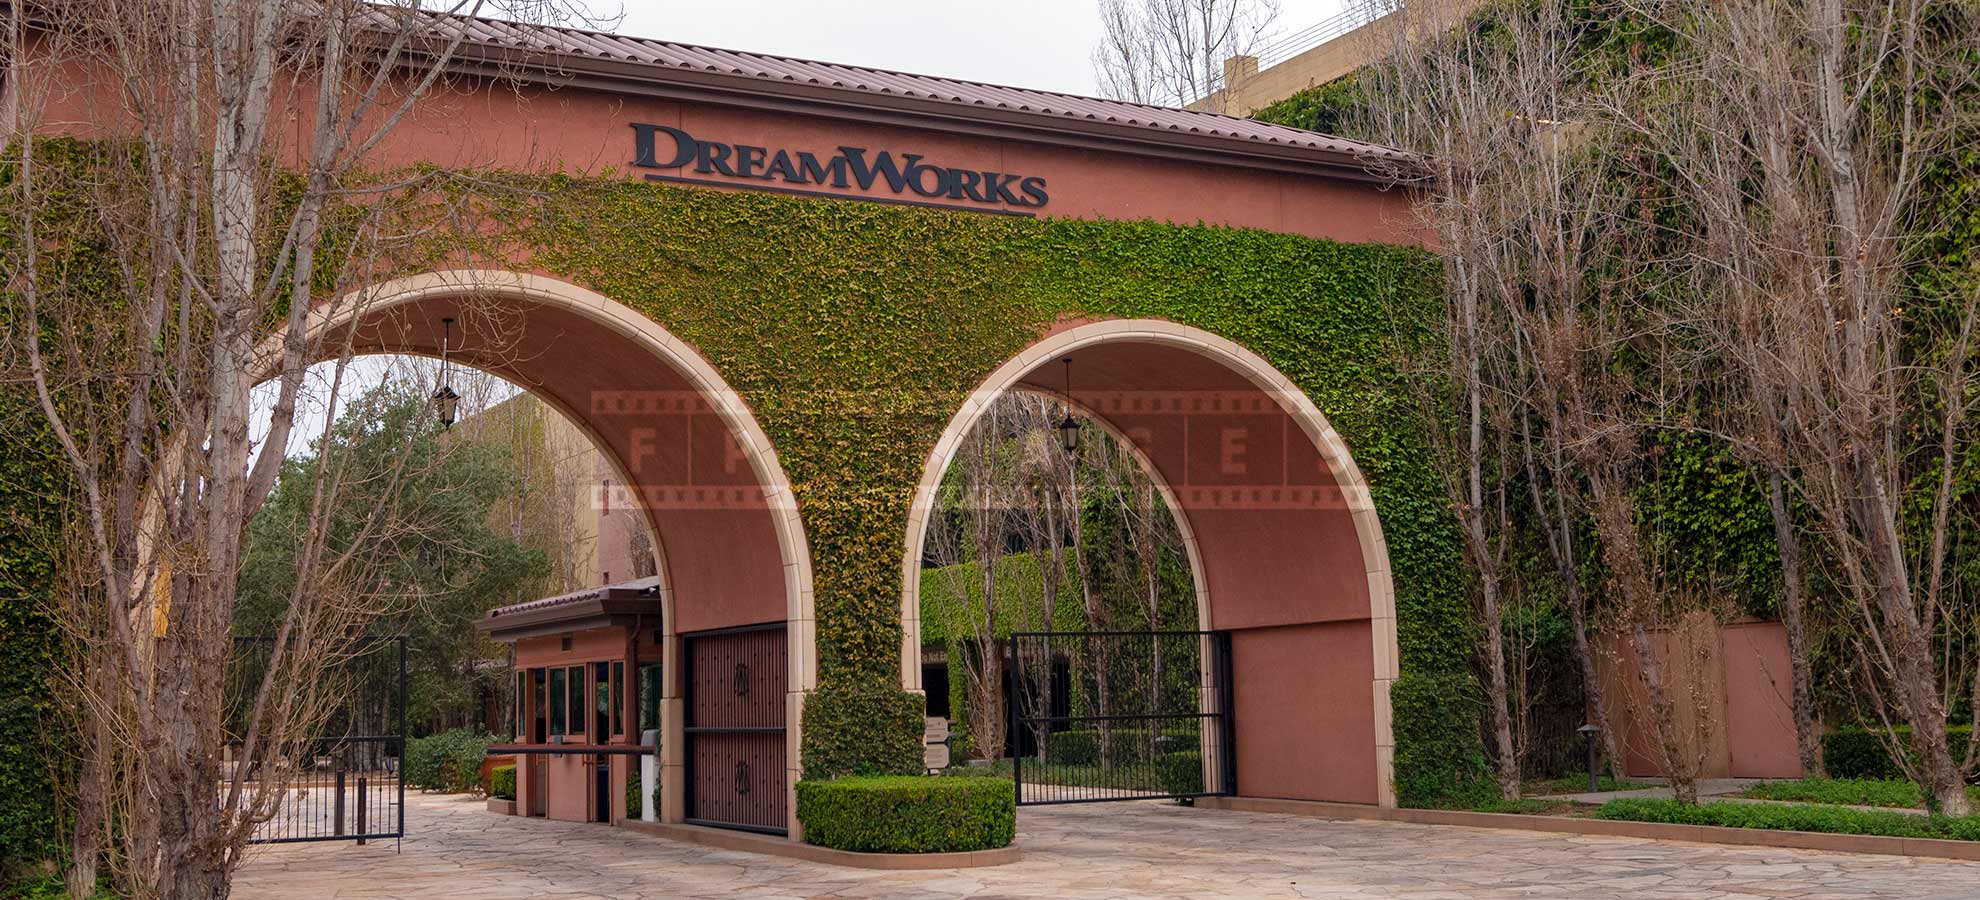 The Entrance to the DreamWorks Studios